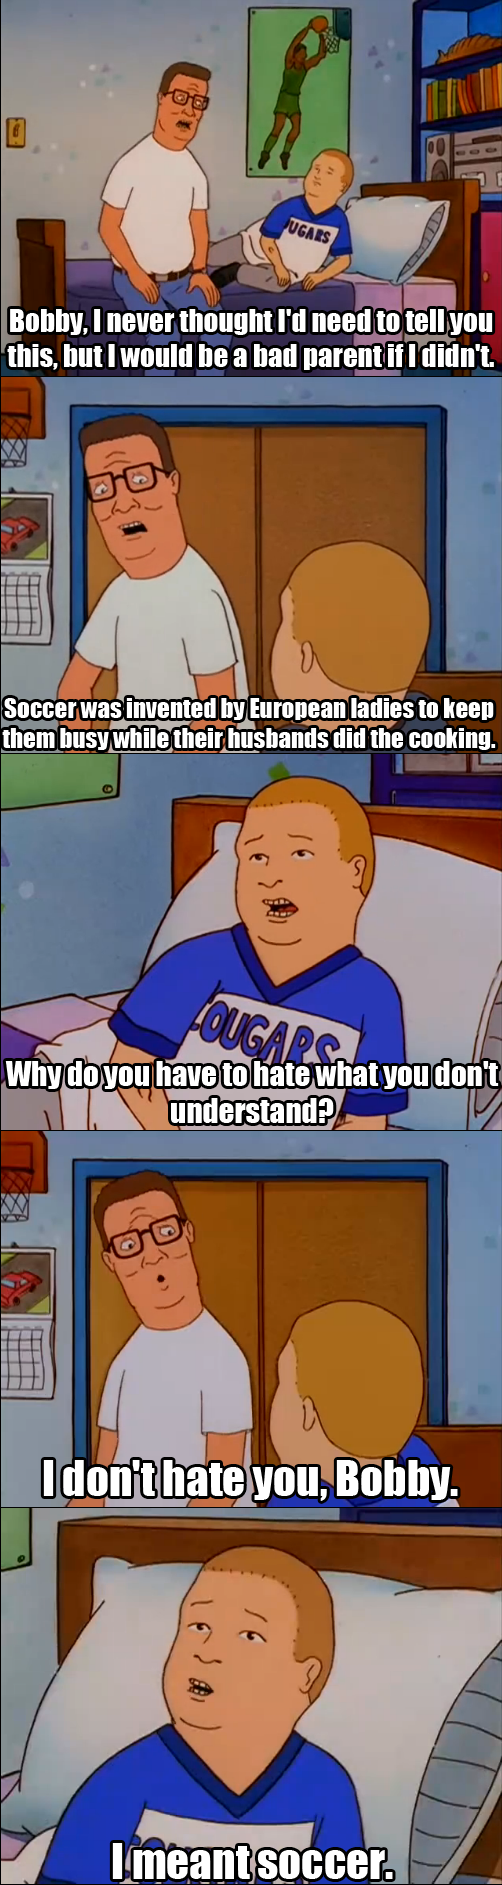 Hank Hill's opinion on the world cup.